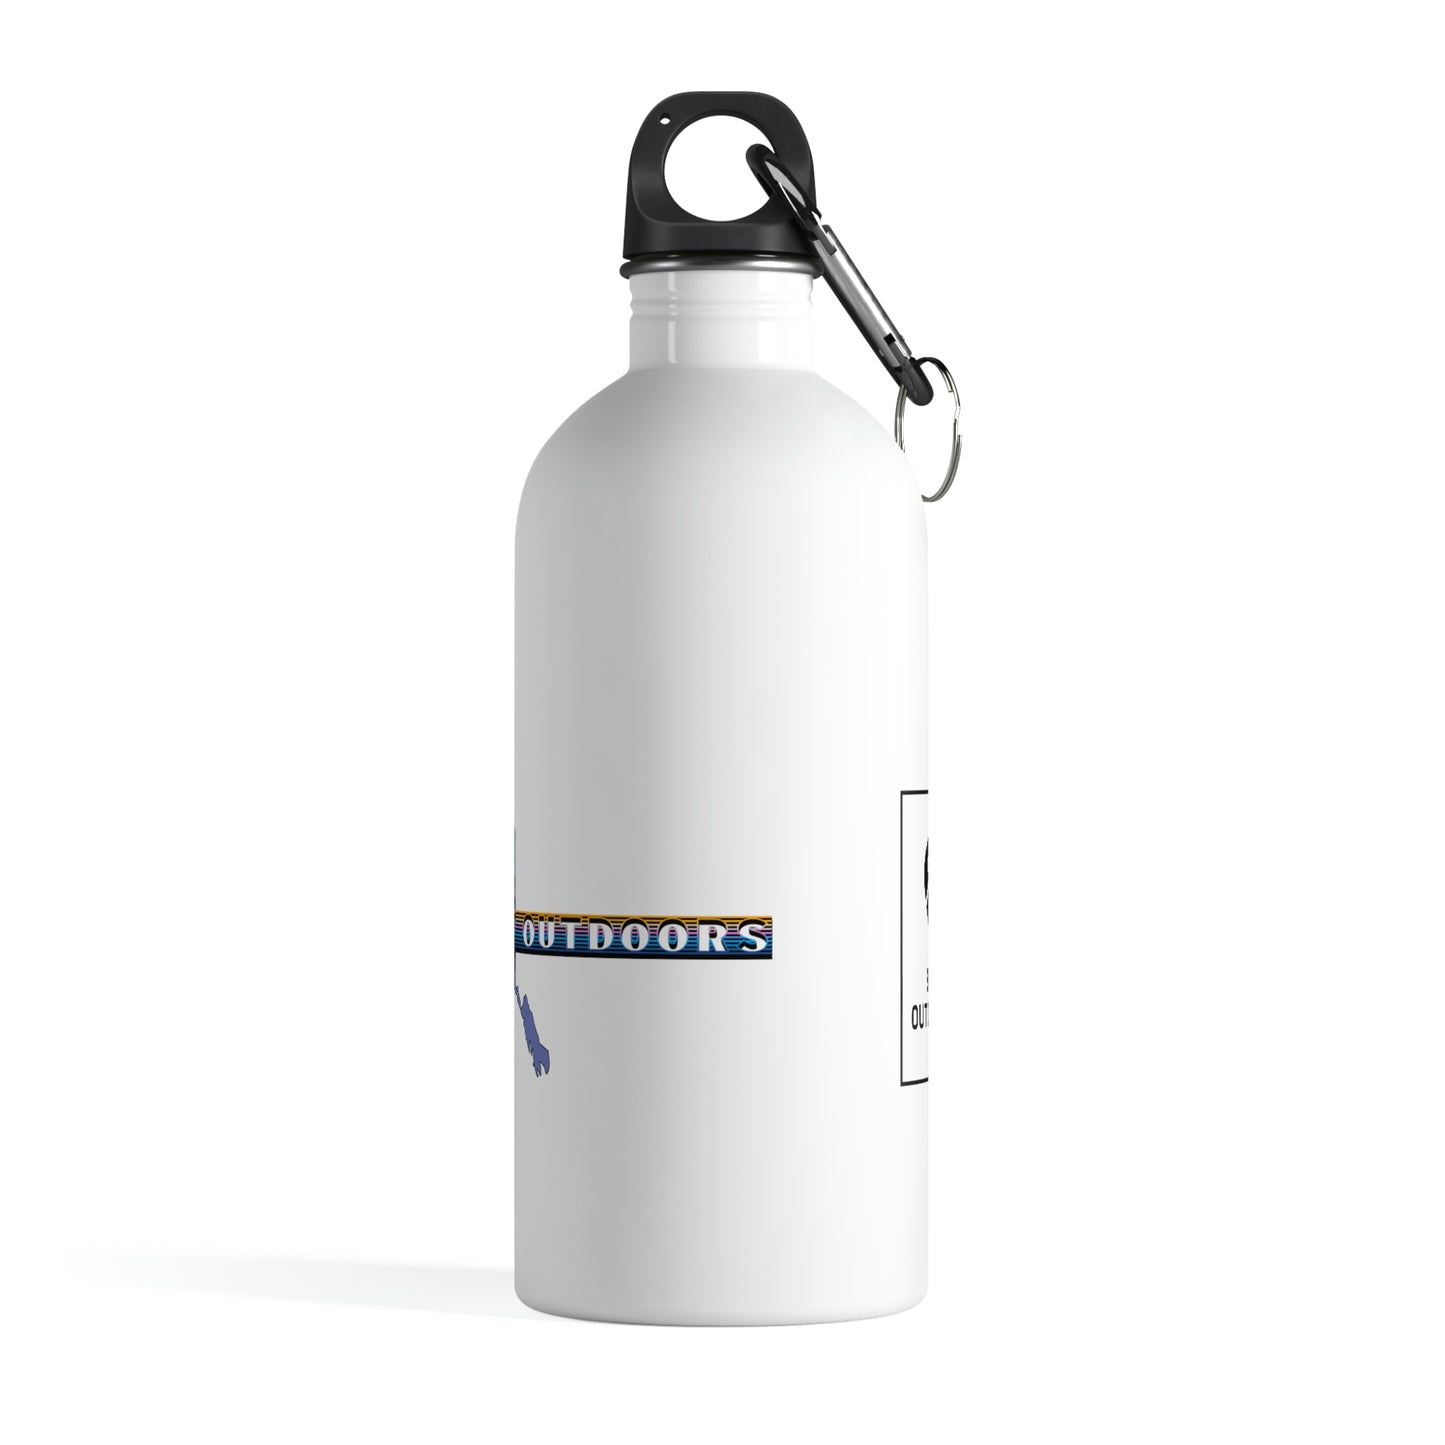 Retro Stainless Steel Water Bottle - 907Outdoors